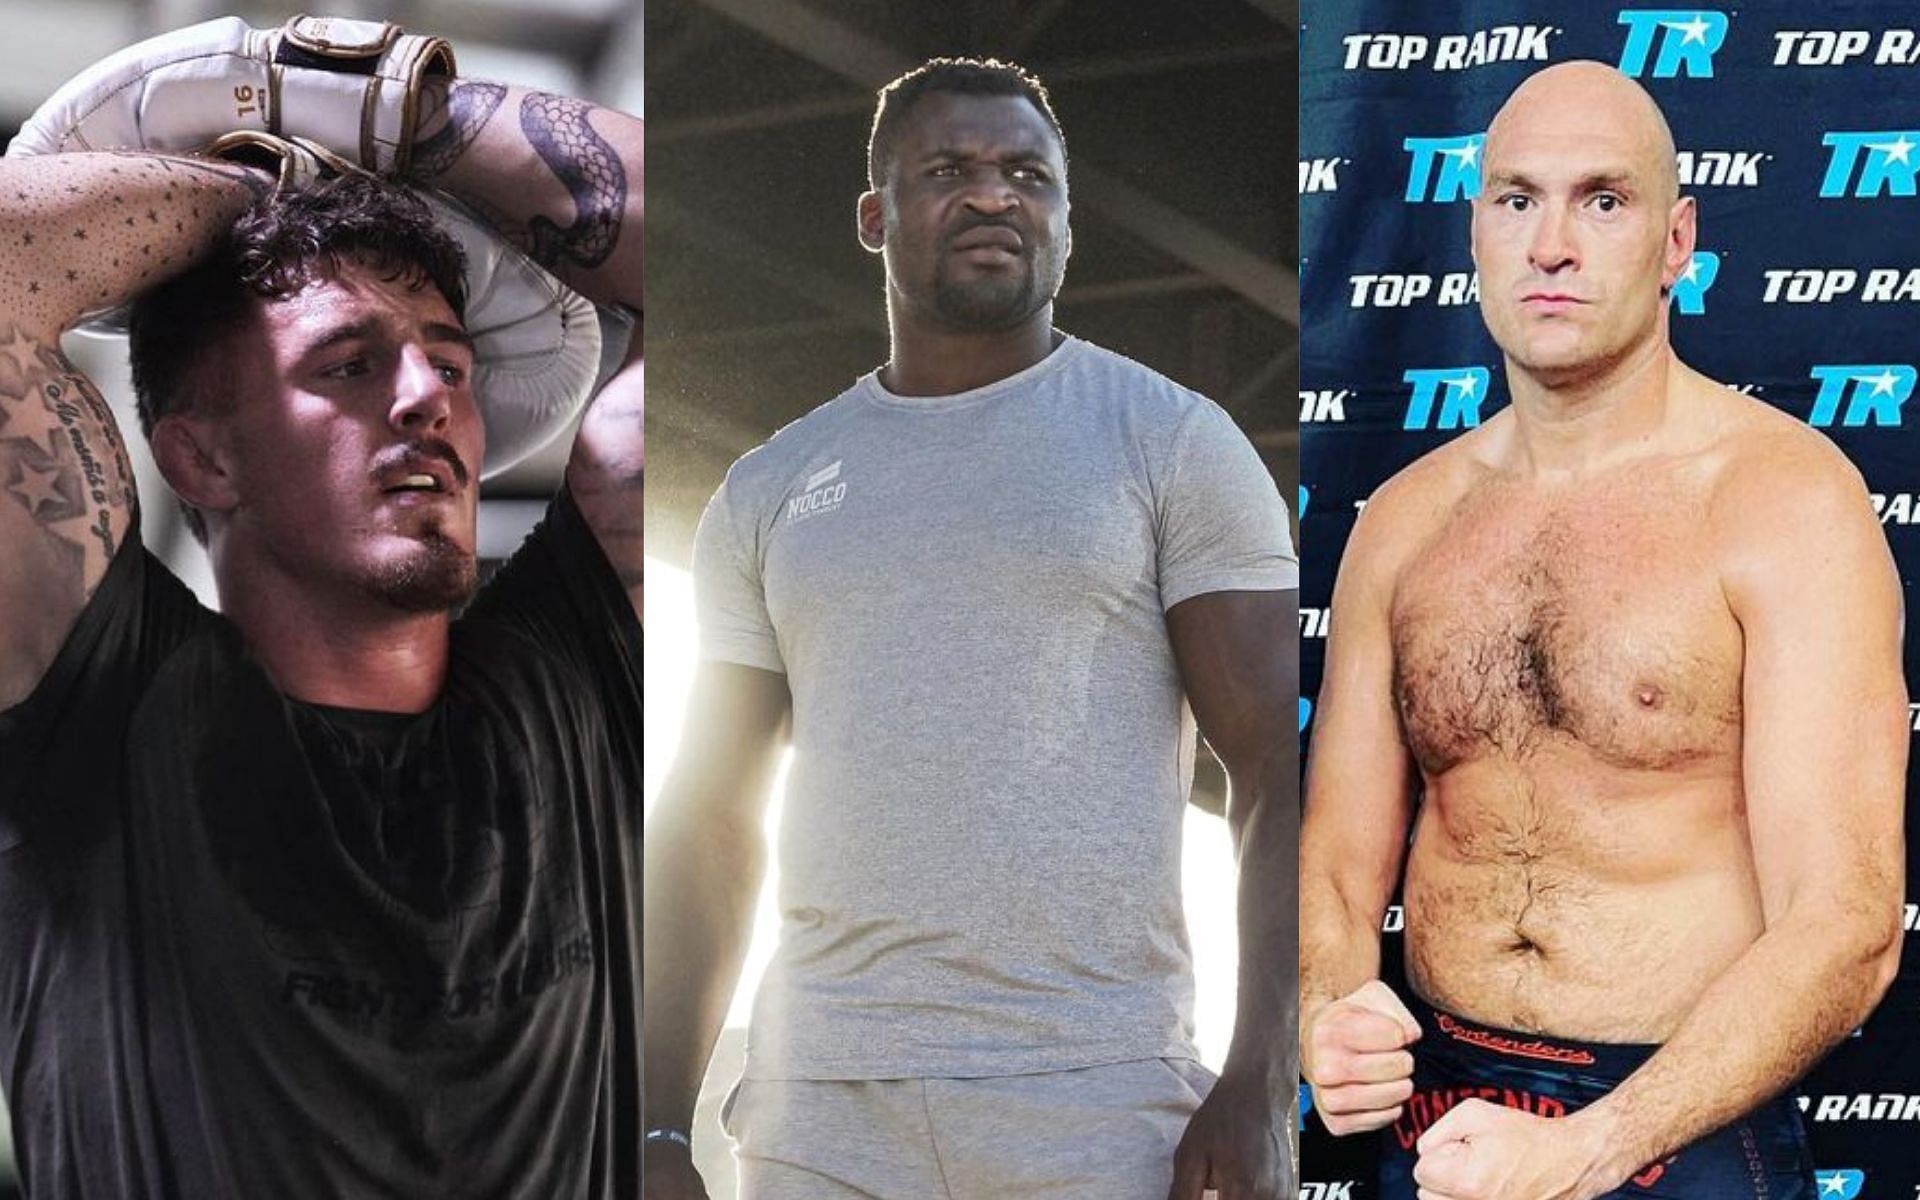 Tom Aspinall (left), Francis Ngannou (middle), Tyson Fury (right) [Image credits: @tomaspinall93, @francisngannou, and @gypsyking101 via Instagram]